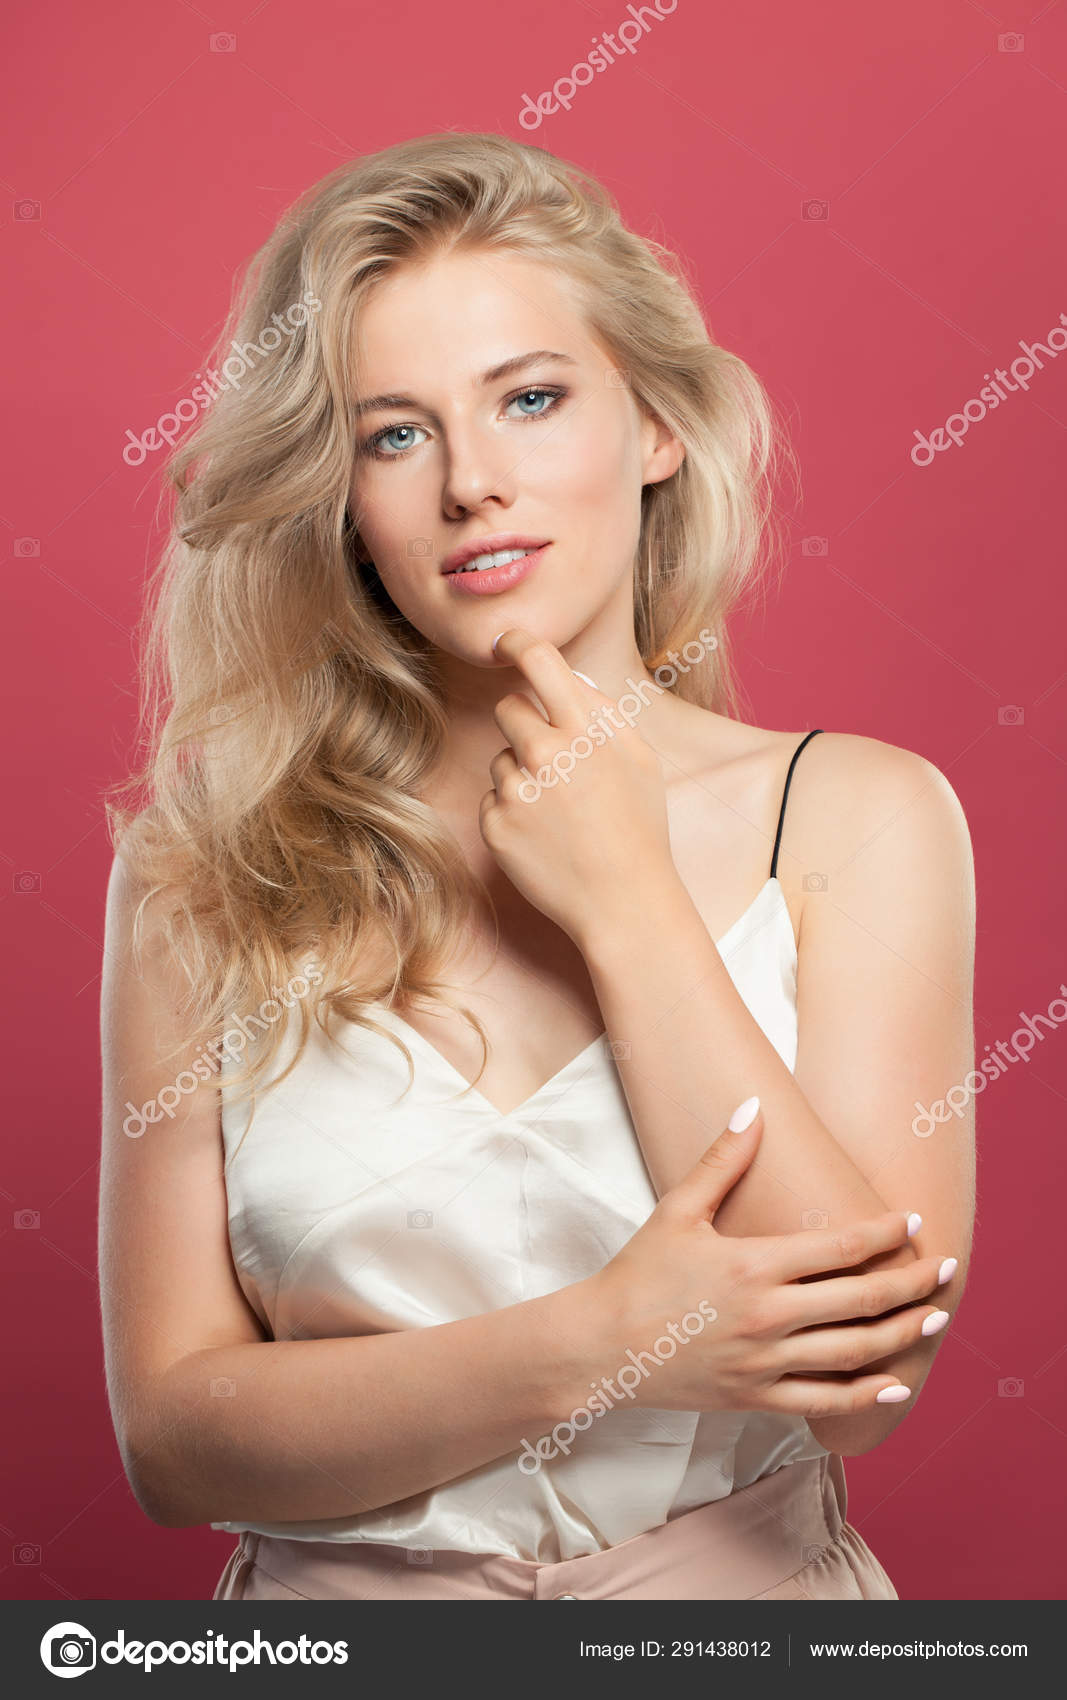 Natural Blonde Woman With Long Hair On Pink Background Stock